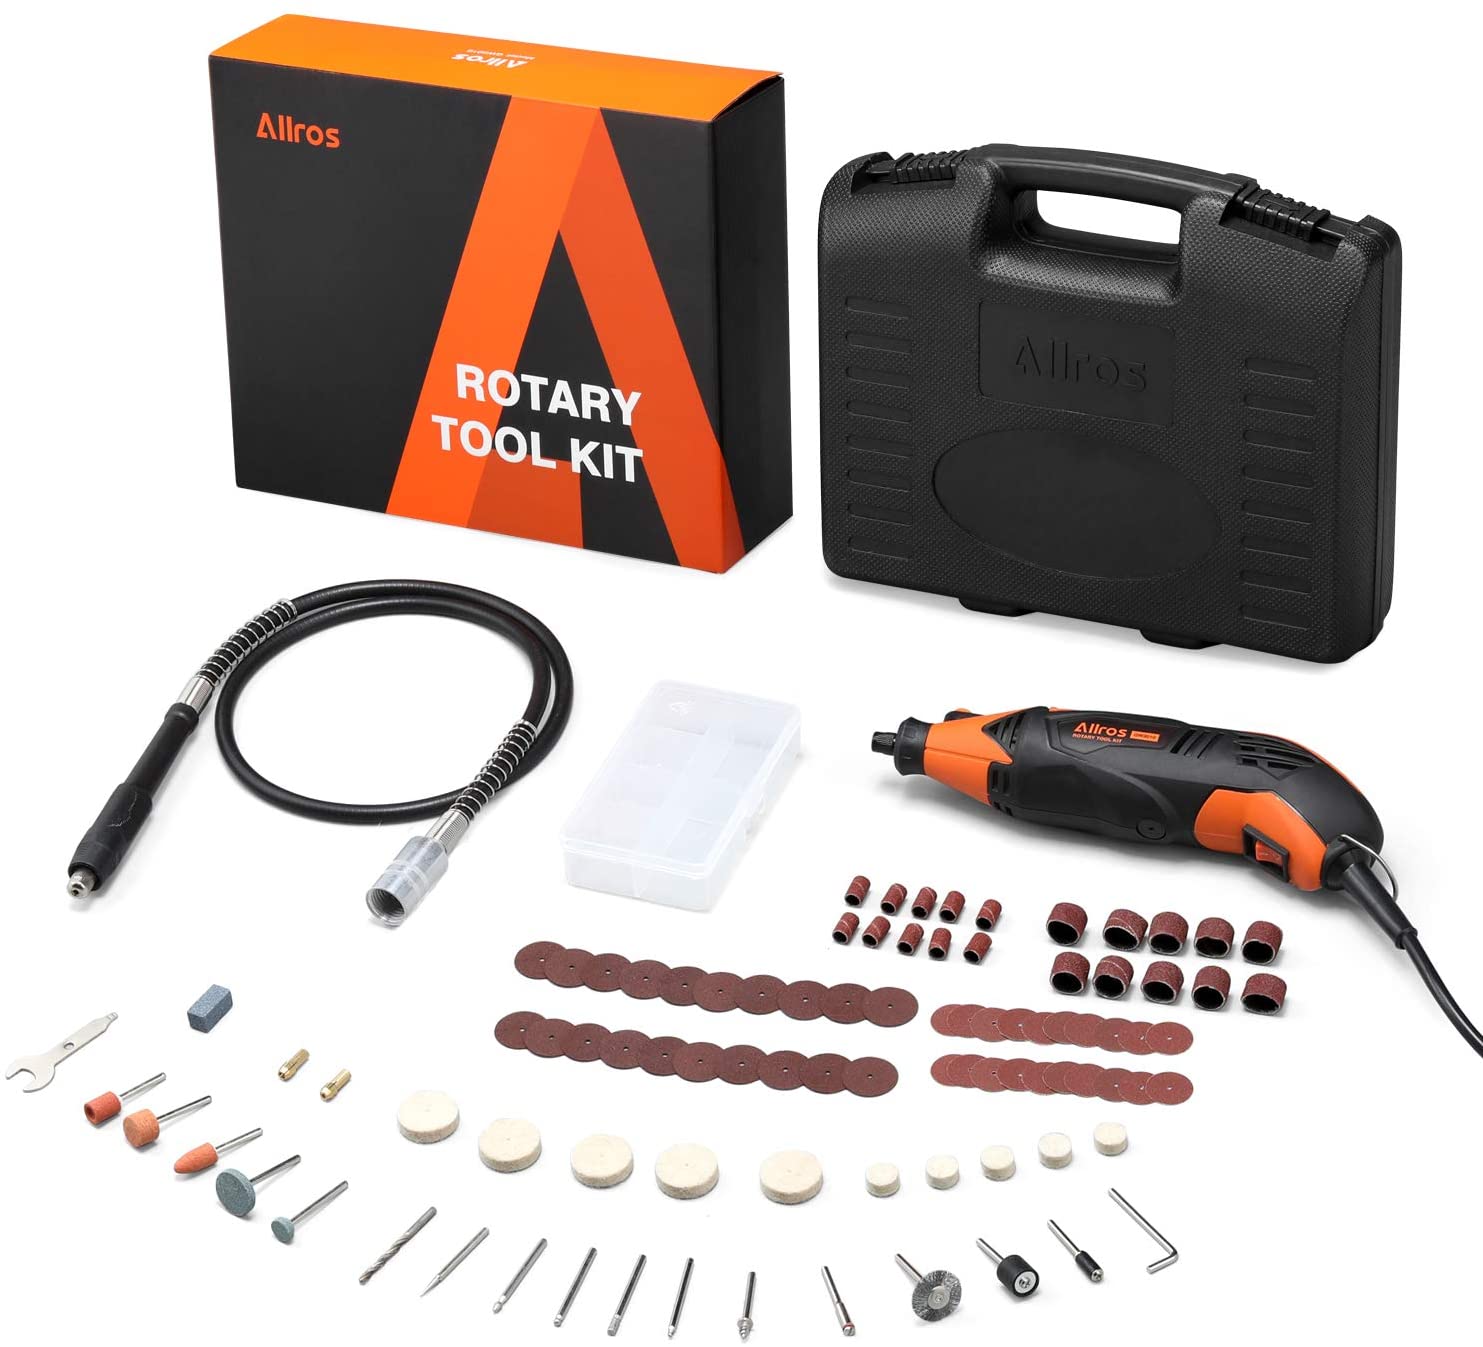 Allross 170W Variable Speed & Flex Shaft Rotary Tool Kit, 100-Pieces